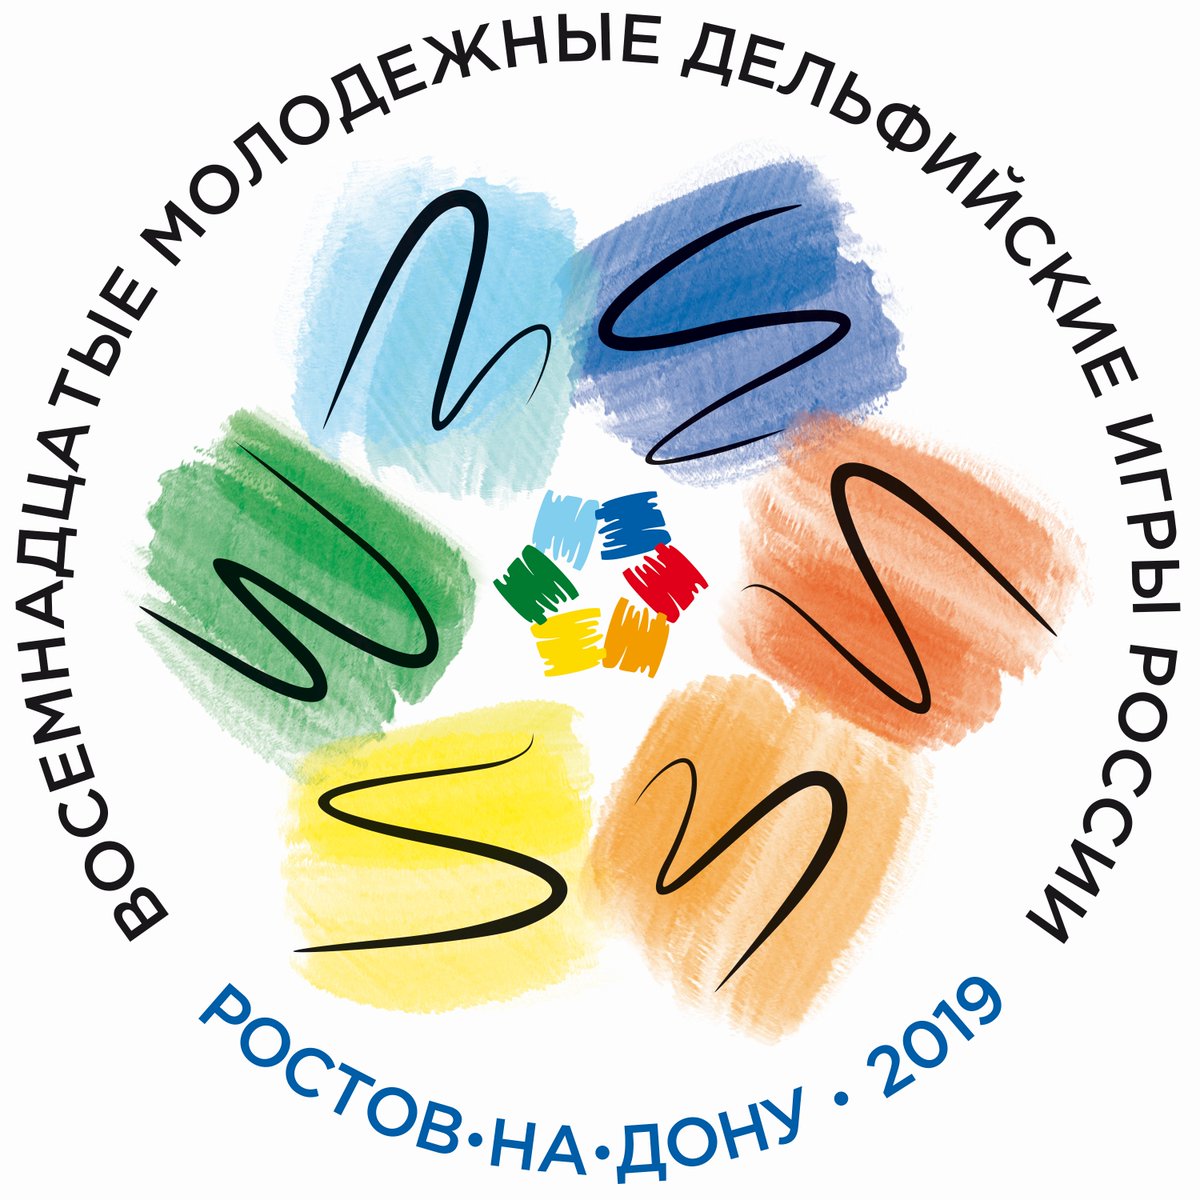 From 19th to 24th of April, 2019 the Eighteenth Youth Delphic Games of Russia is held in the Rostov region #delphicgames #delphicgames2019